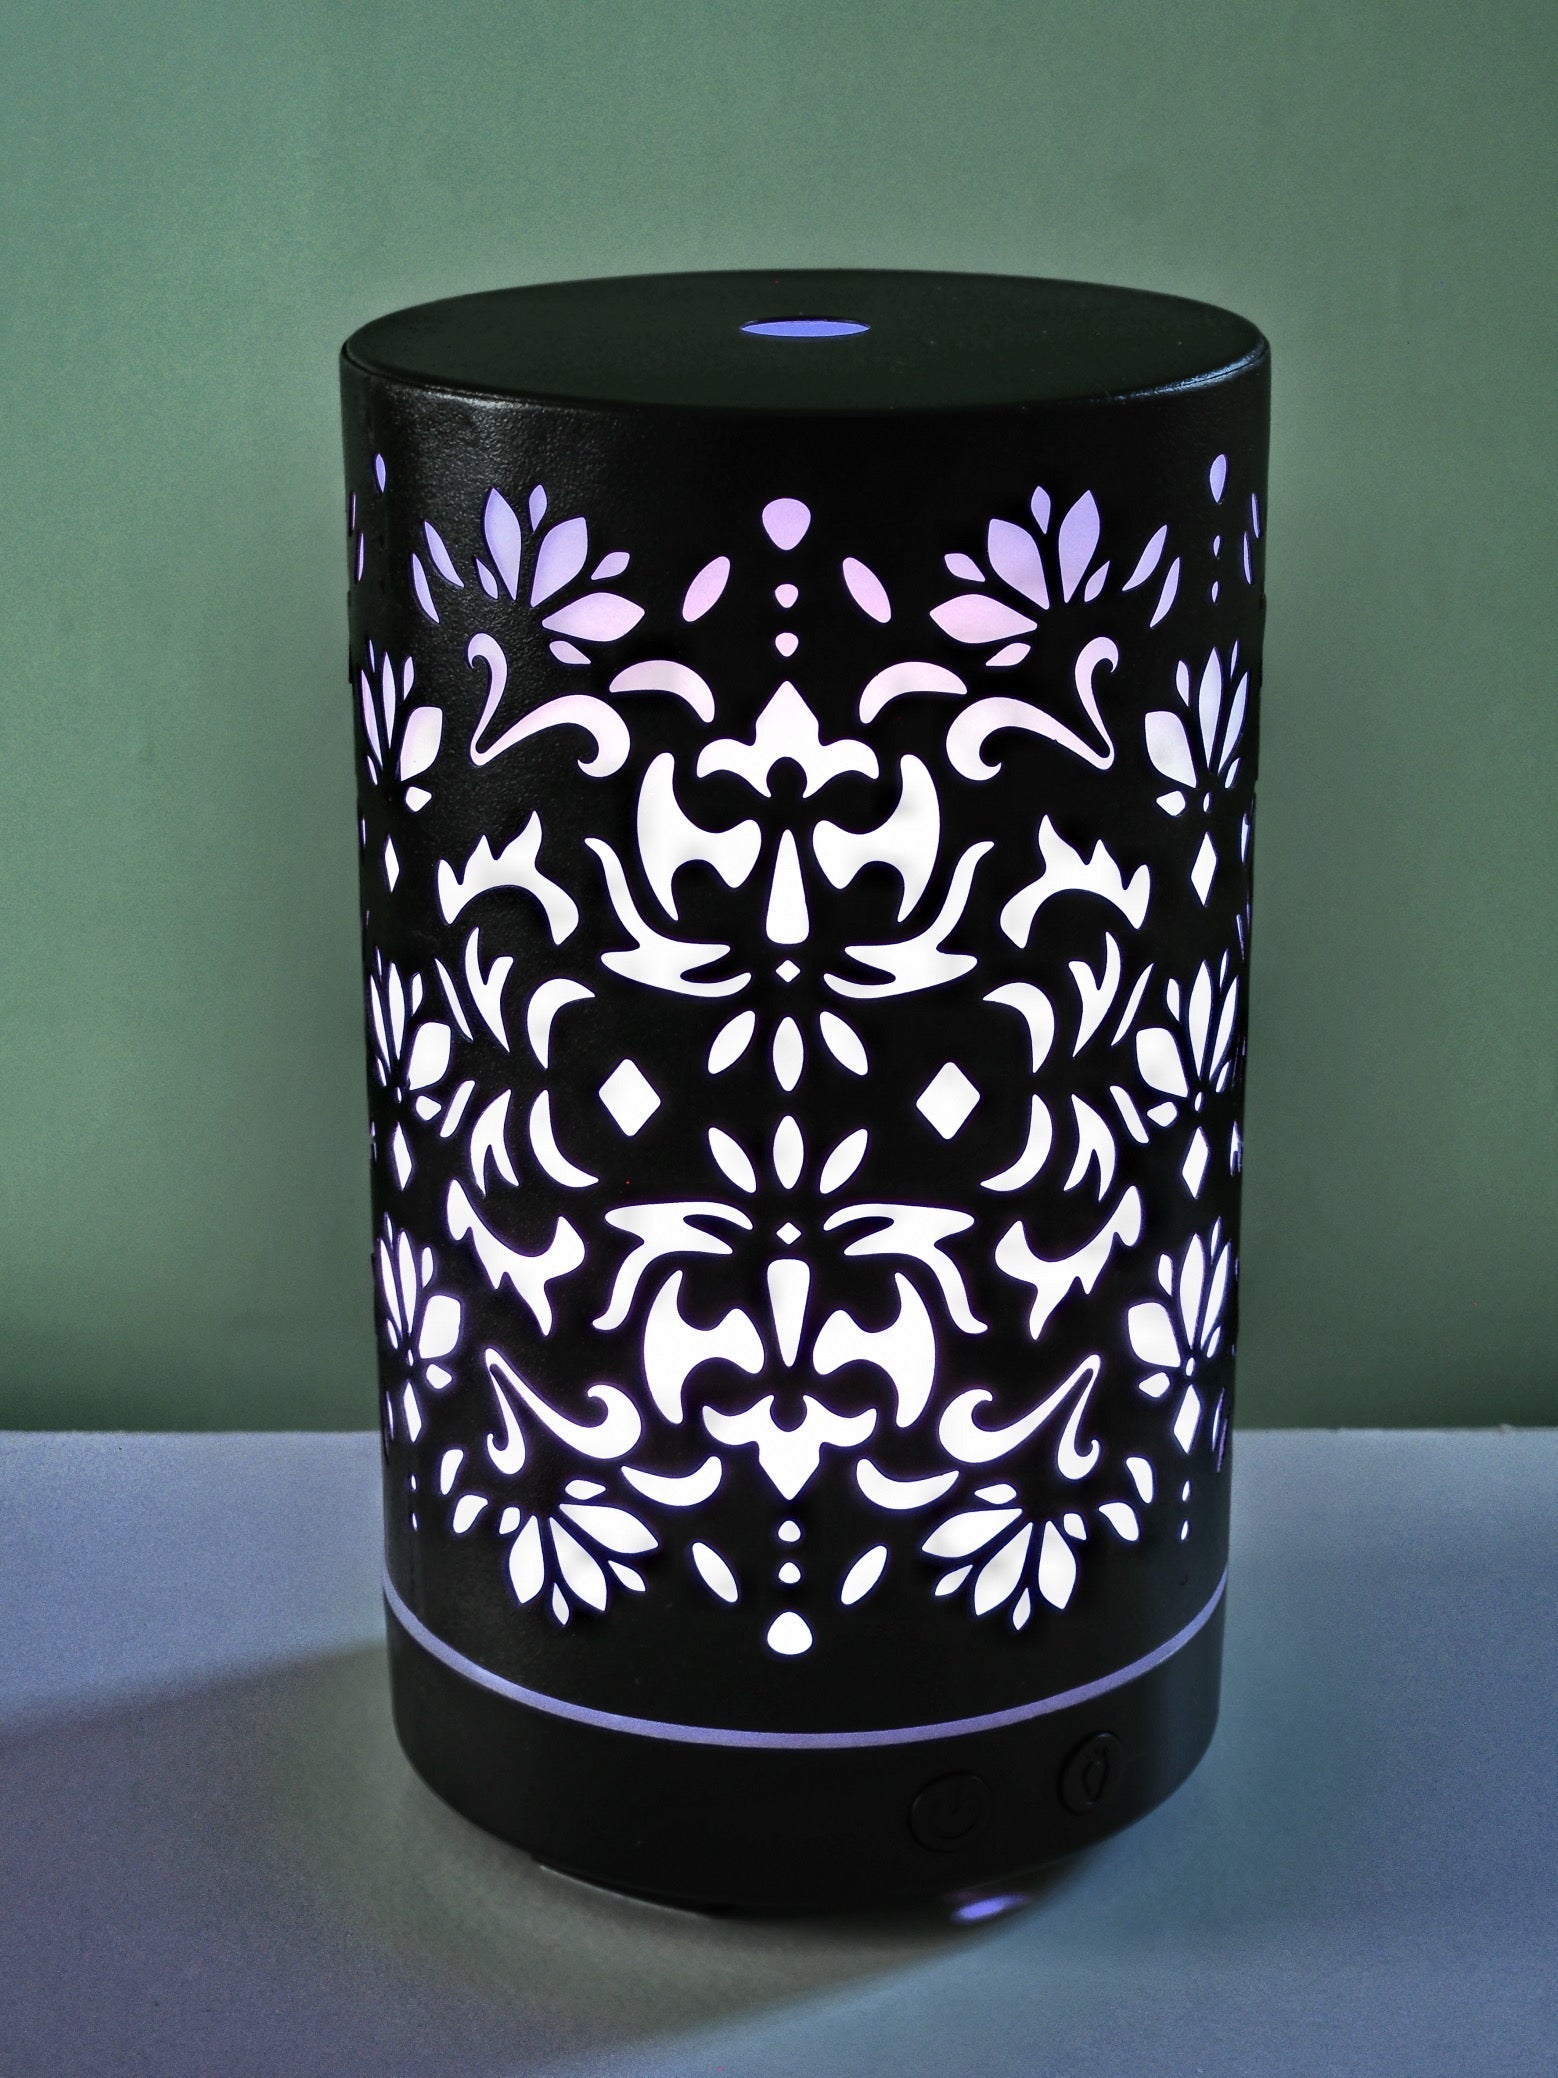 Wellness Essential Oils Diffuser with Lotus Flower by Ancient Infusions.